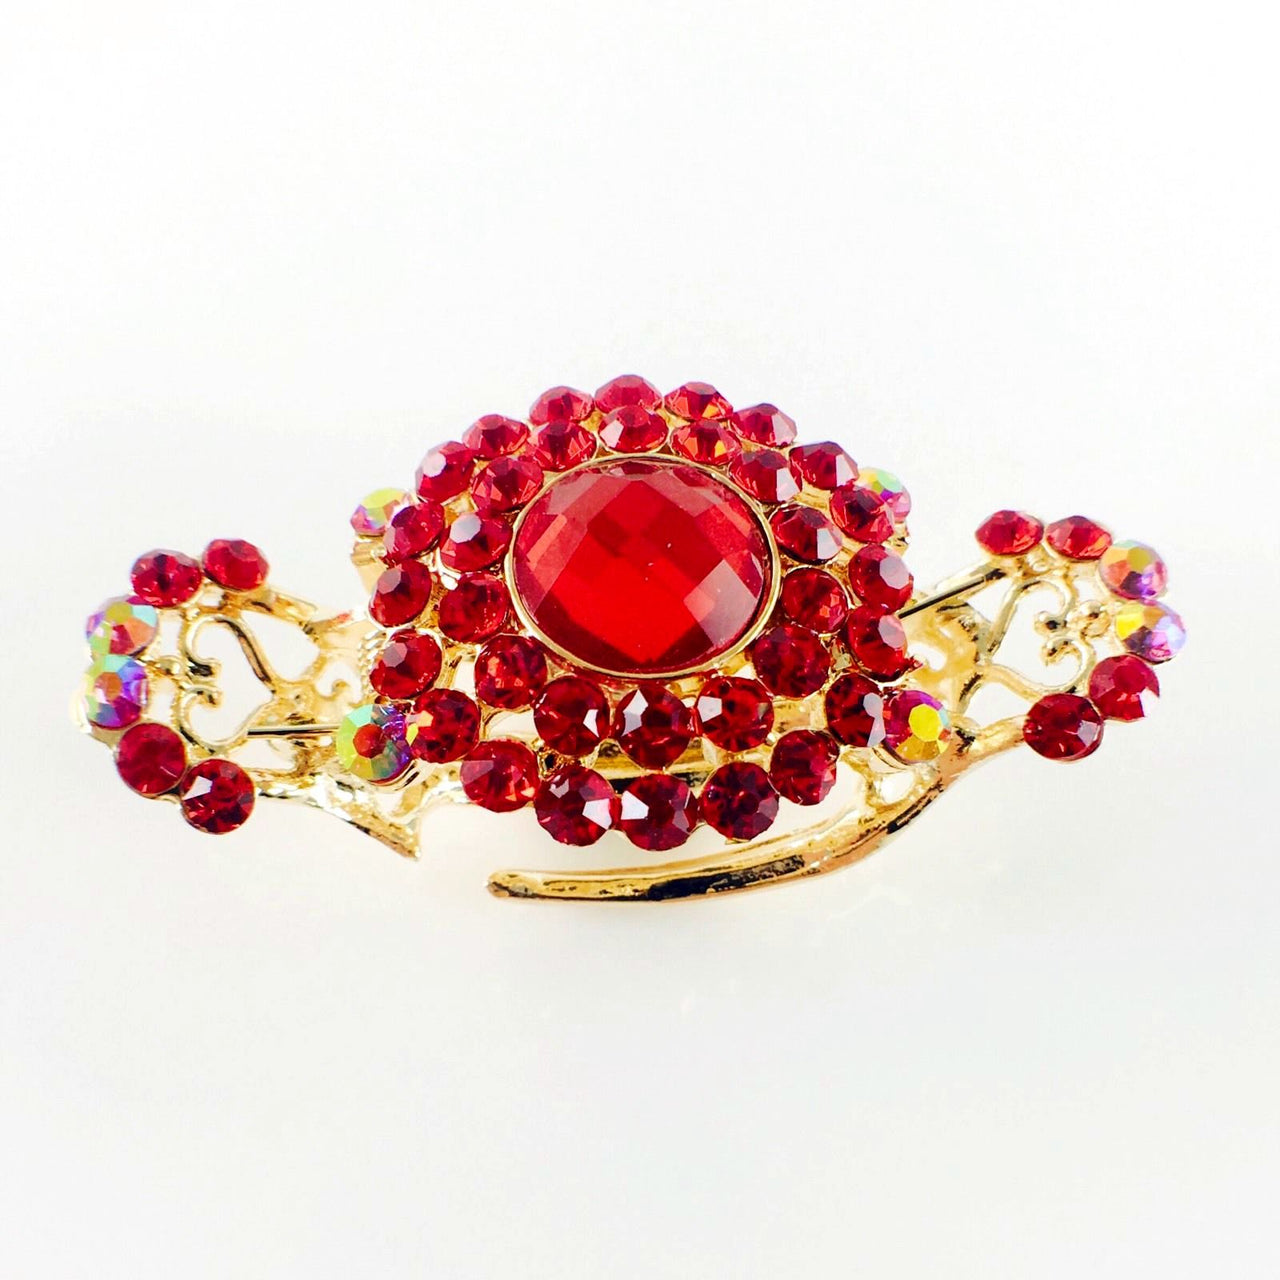 Sunflower Hair Claw Jaw Clip vintage use Rhinestone Crystal gold base Red, Hair Claw - MOGHANT